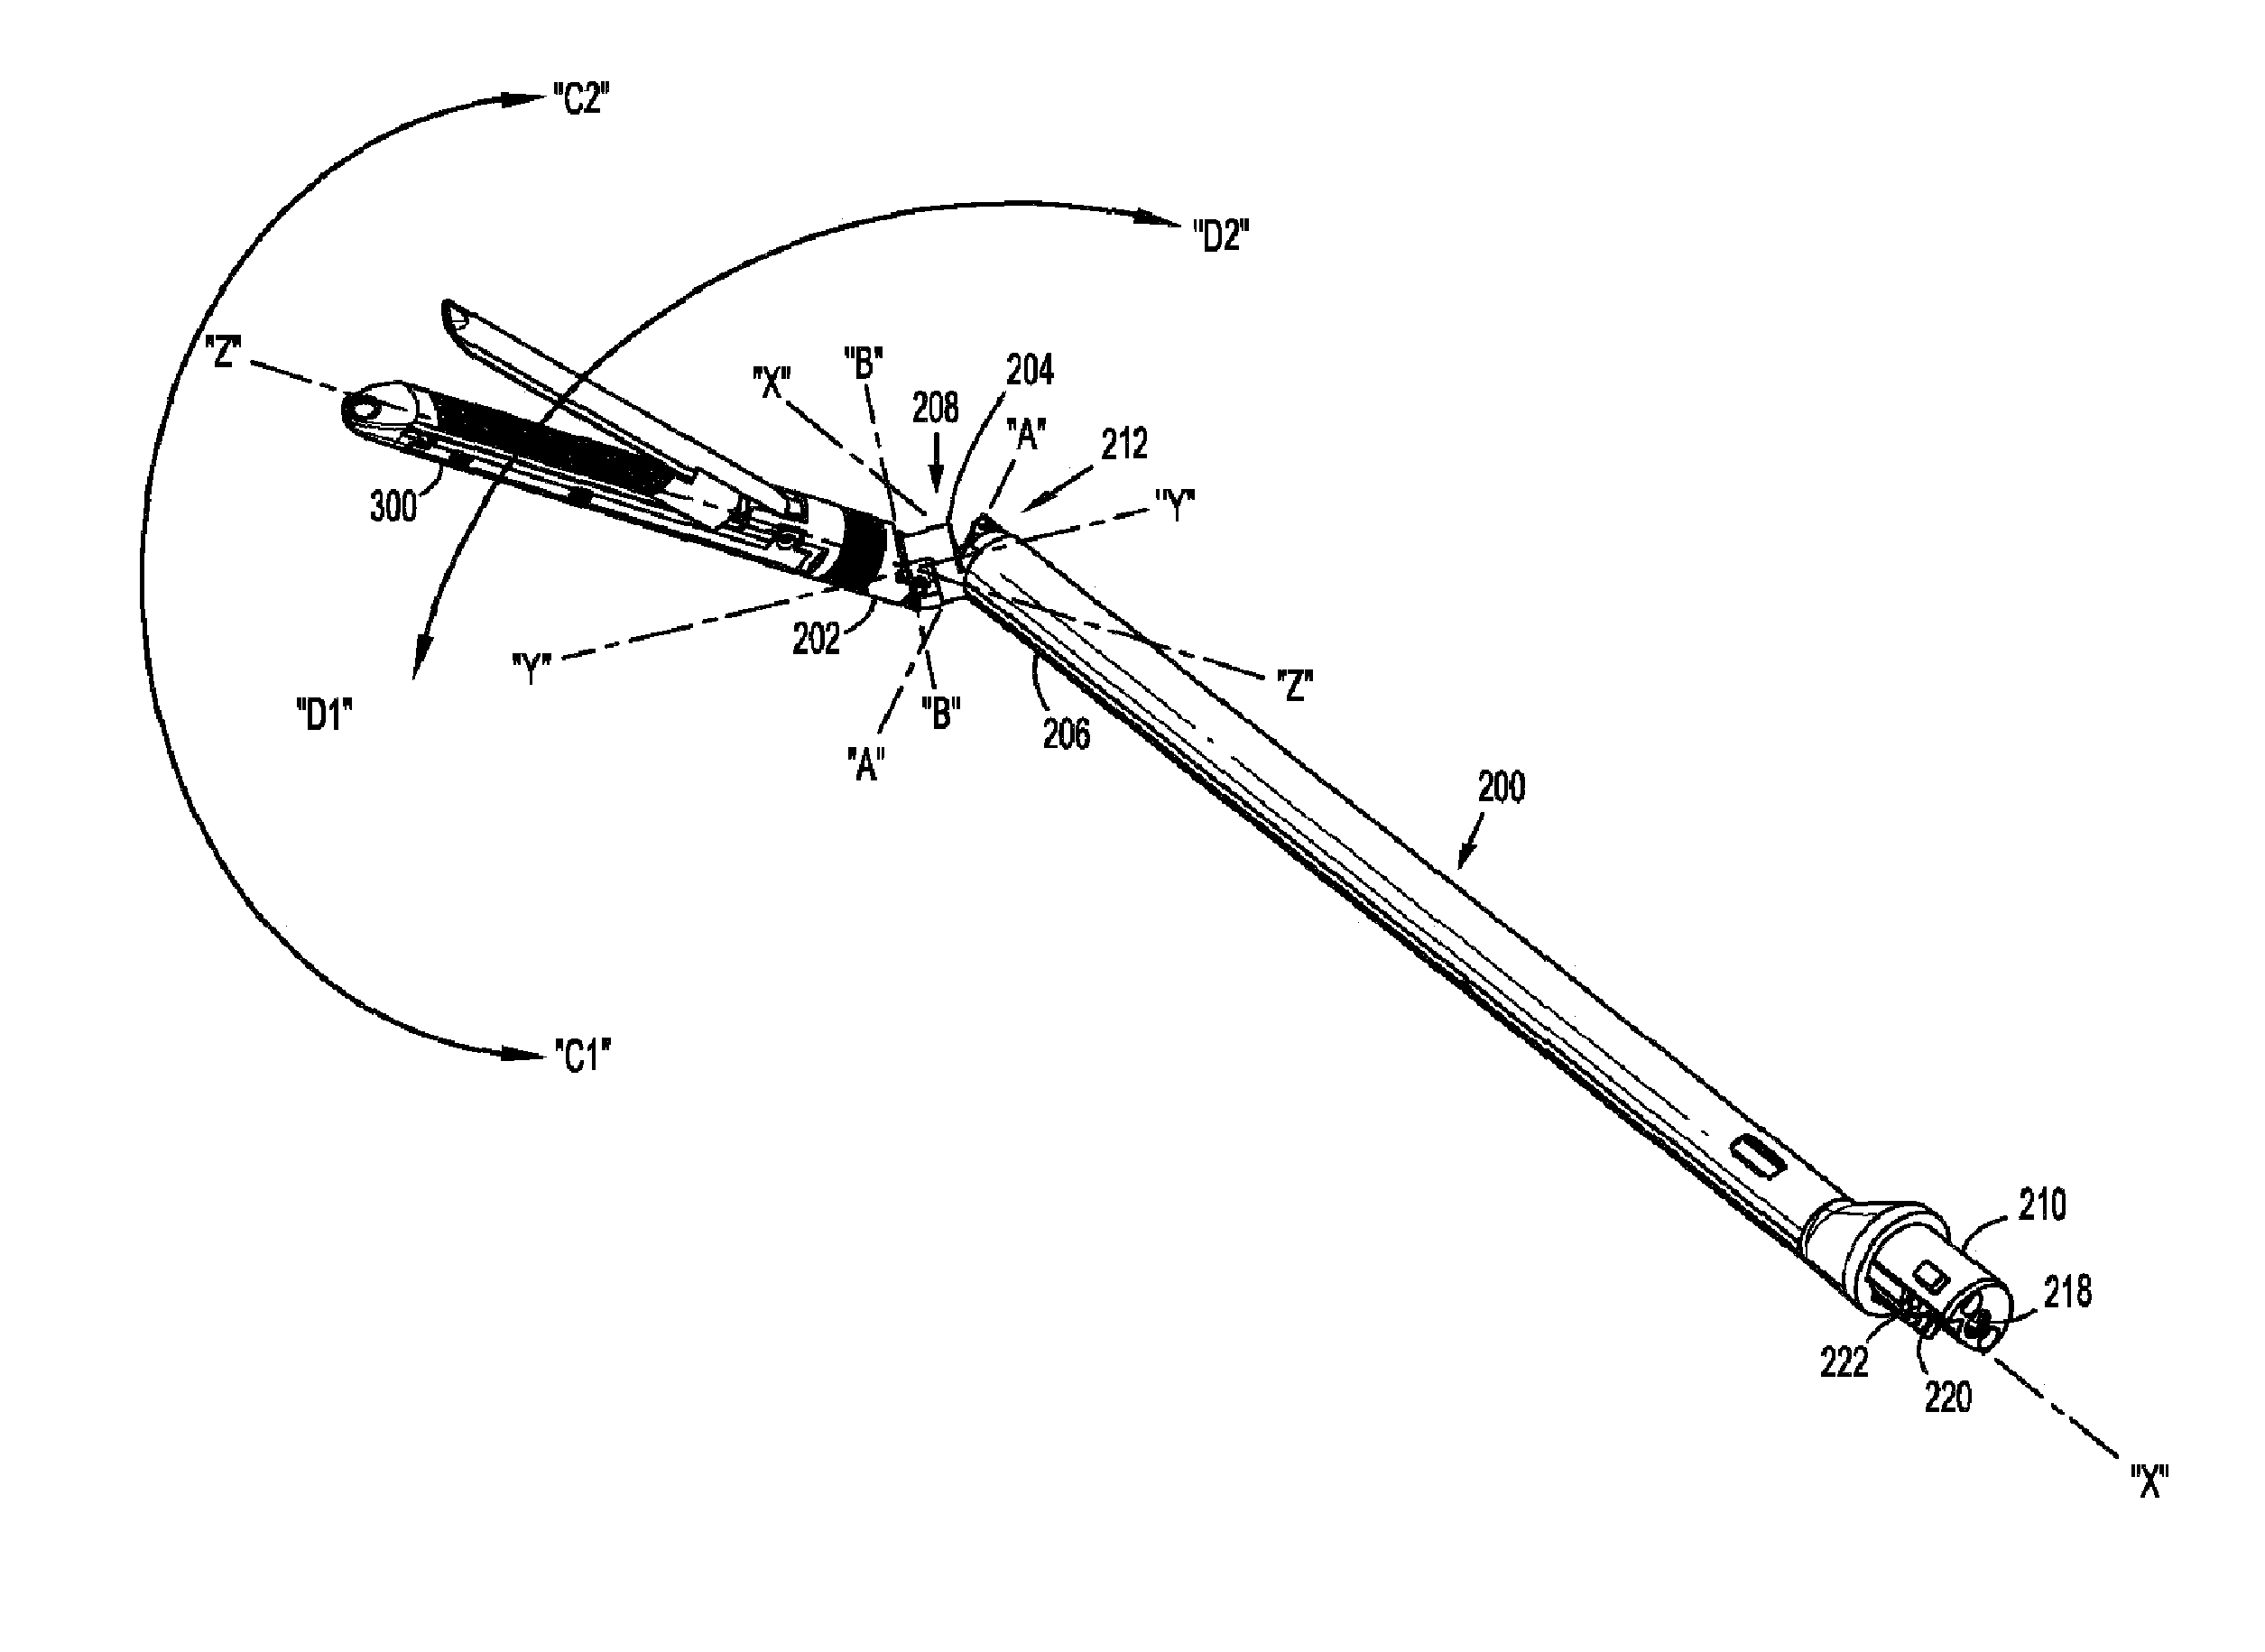 Medical device adapter with wrist mechanism